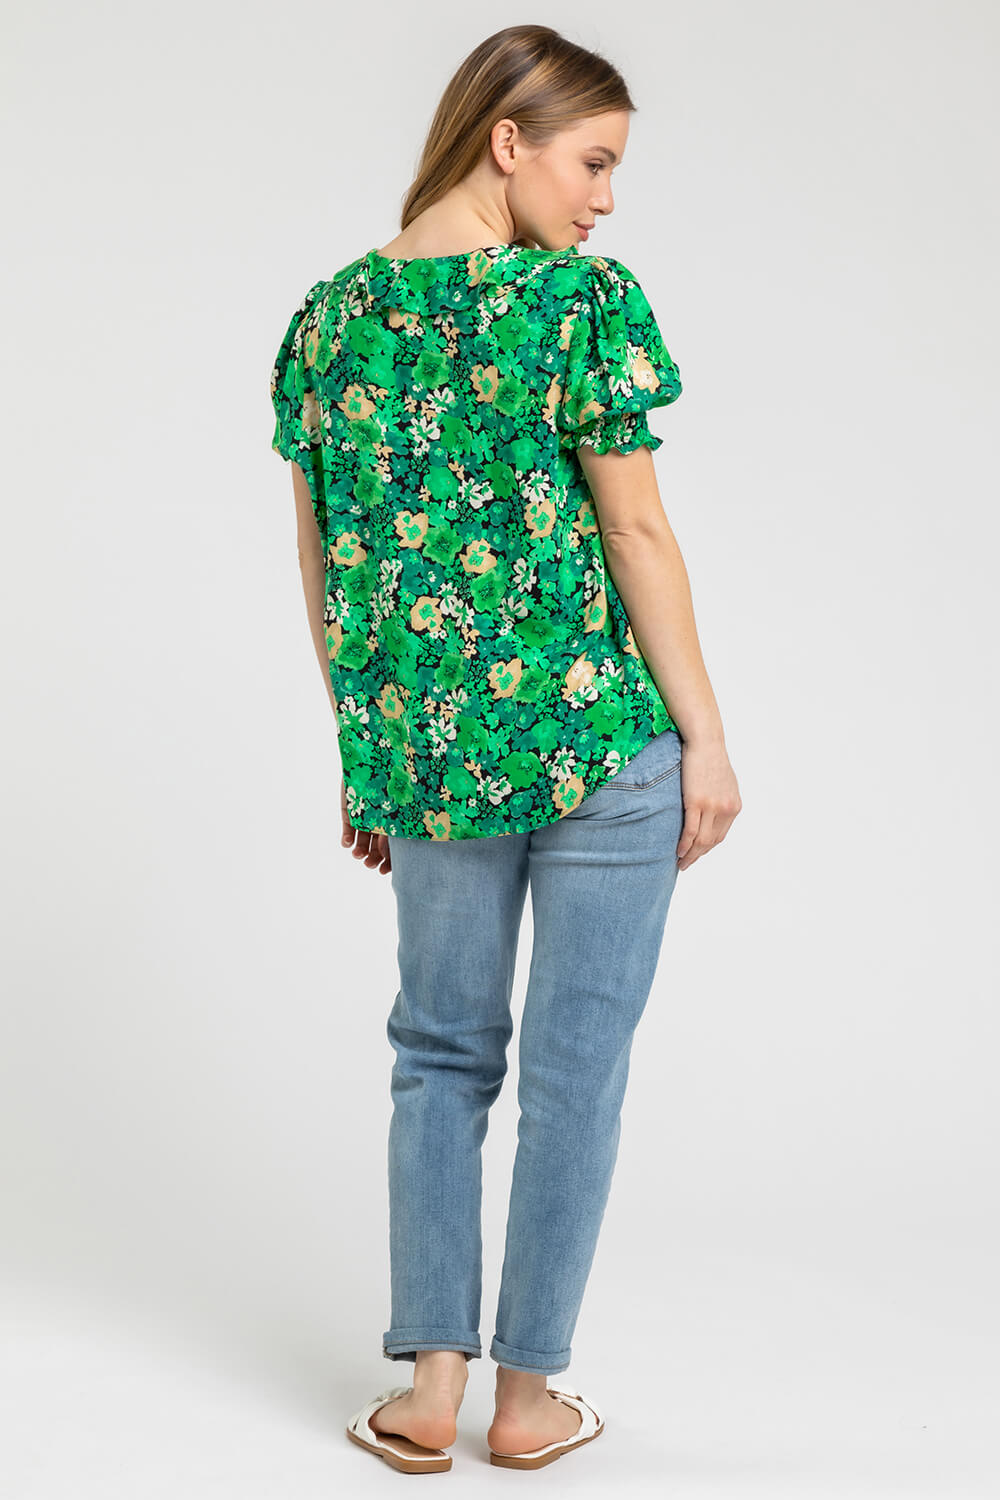 Green Petite Floral Print Frill Detail Top, Image 2 of 4